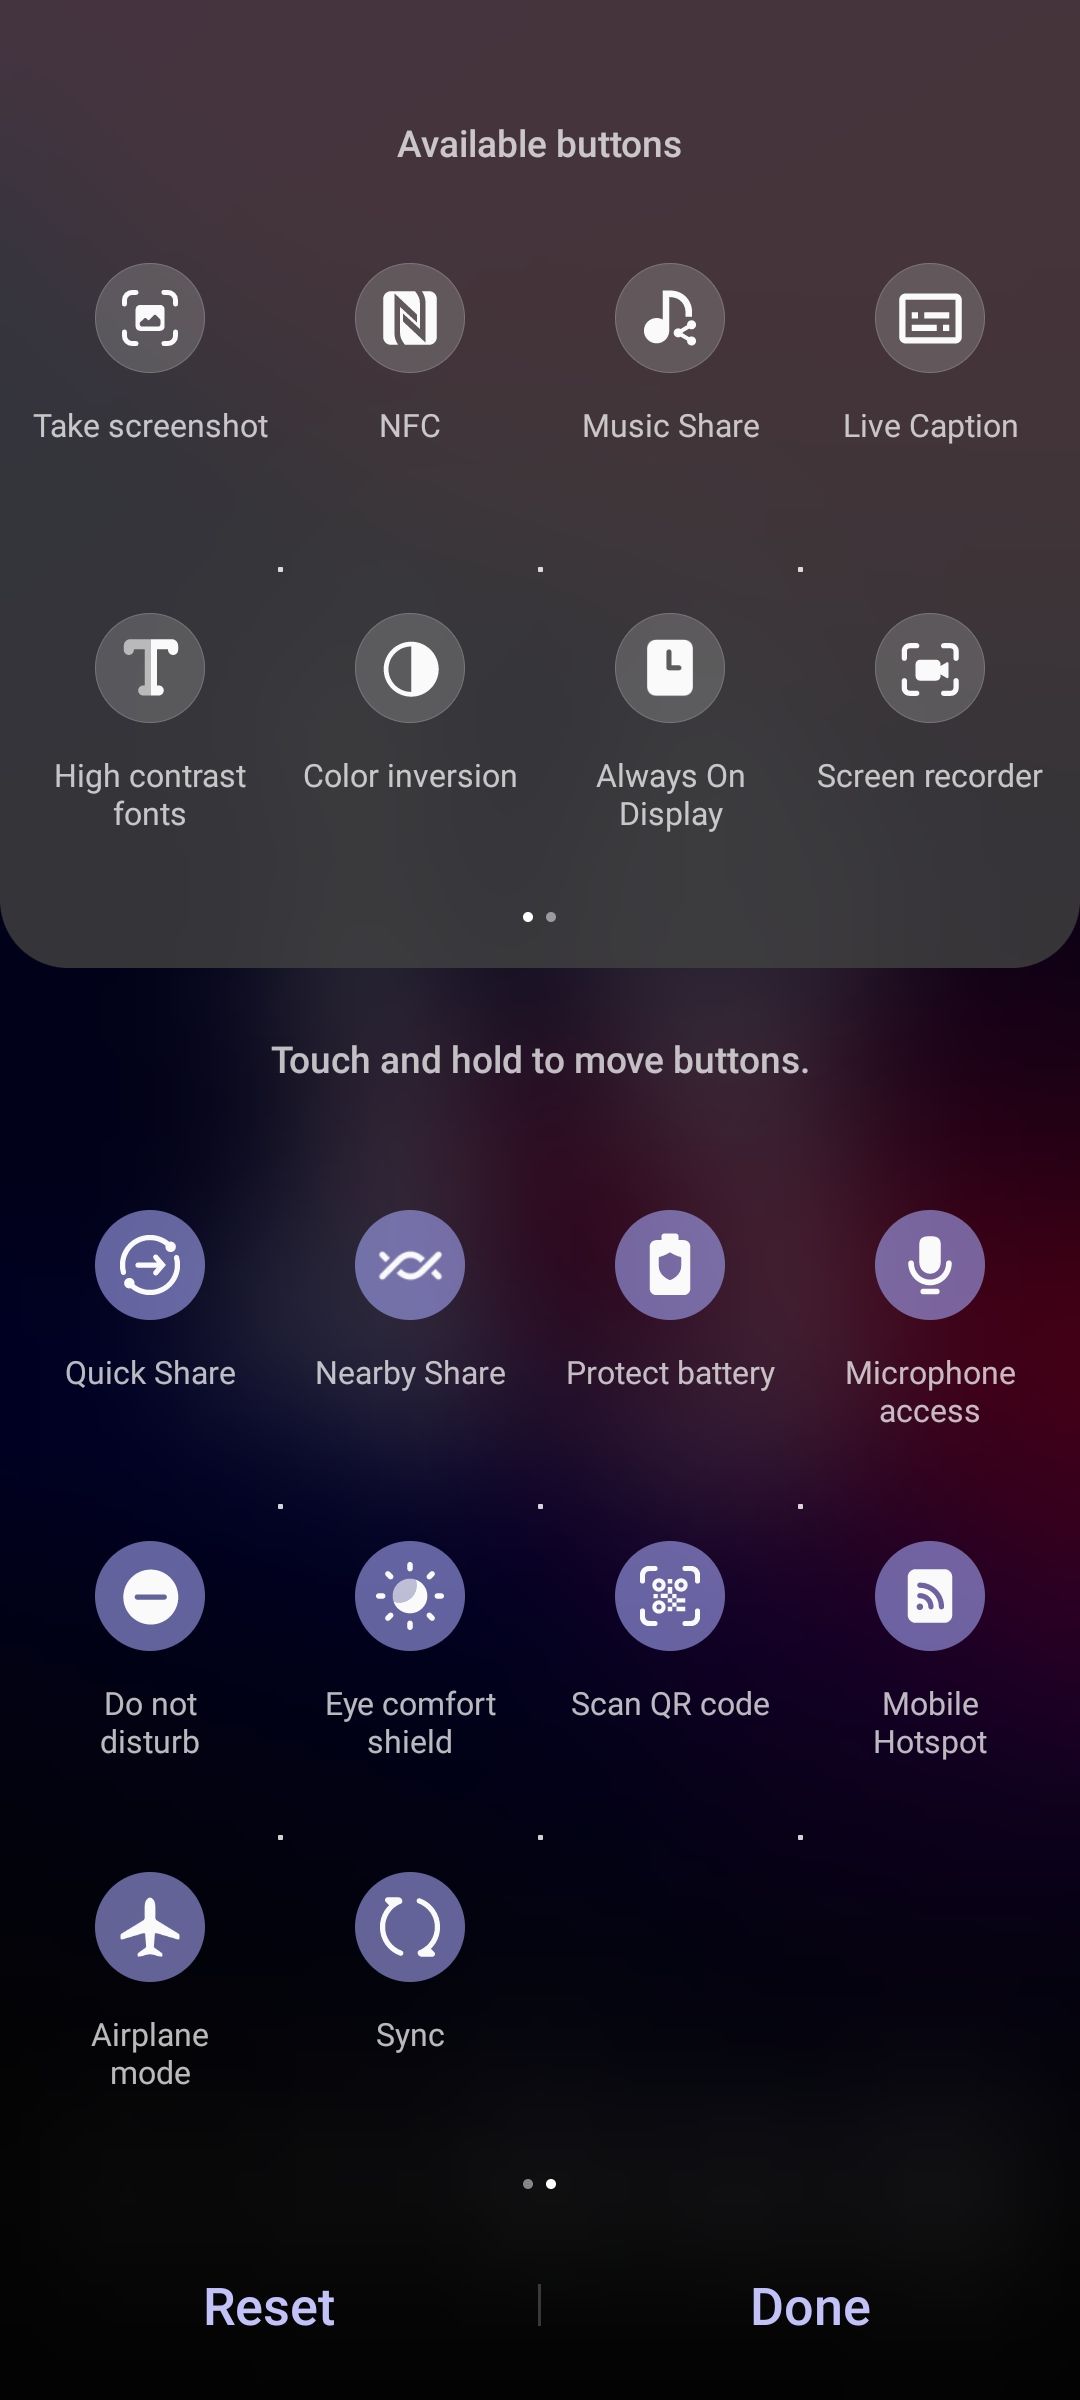 Samsung One UI 5.1 Quick Settings panel Available buttons menu